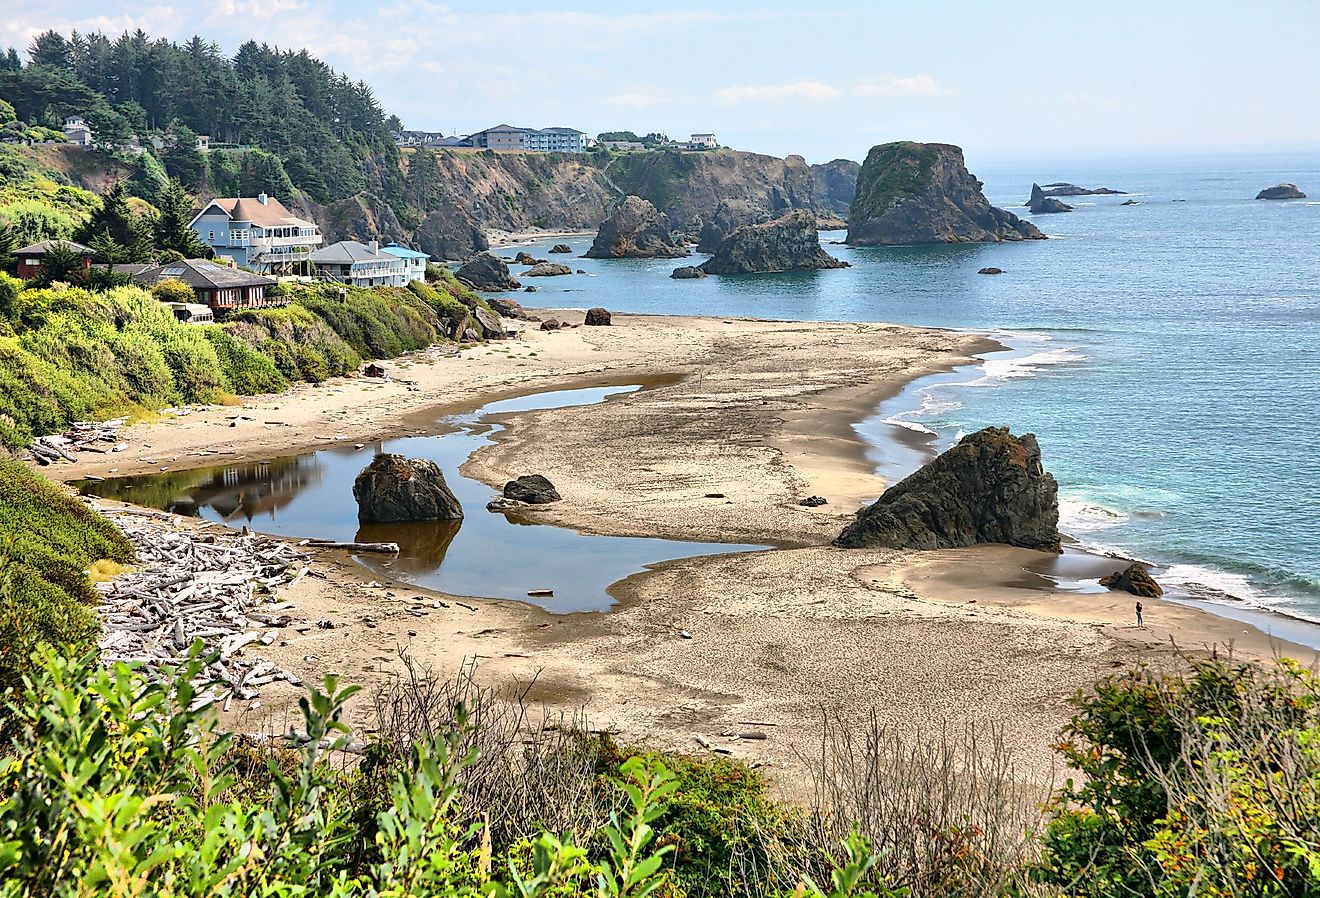 Looking out over the coast in Brookings, Oregon.